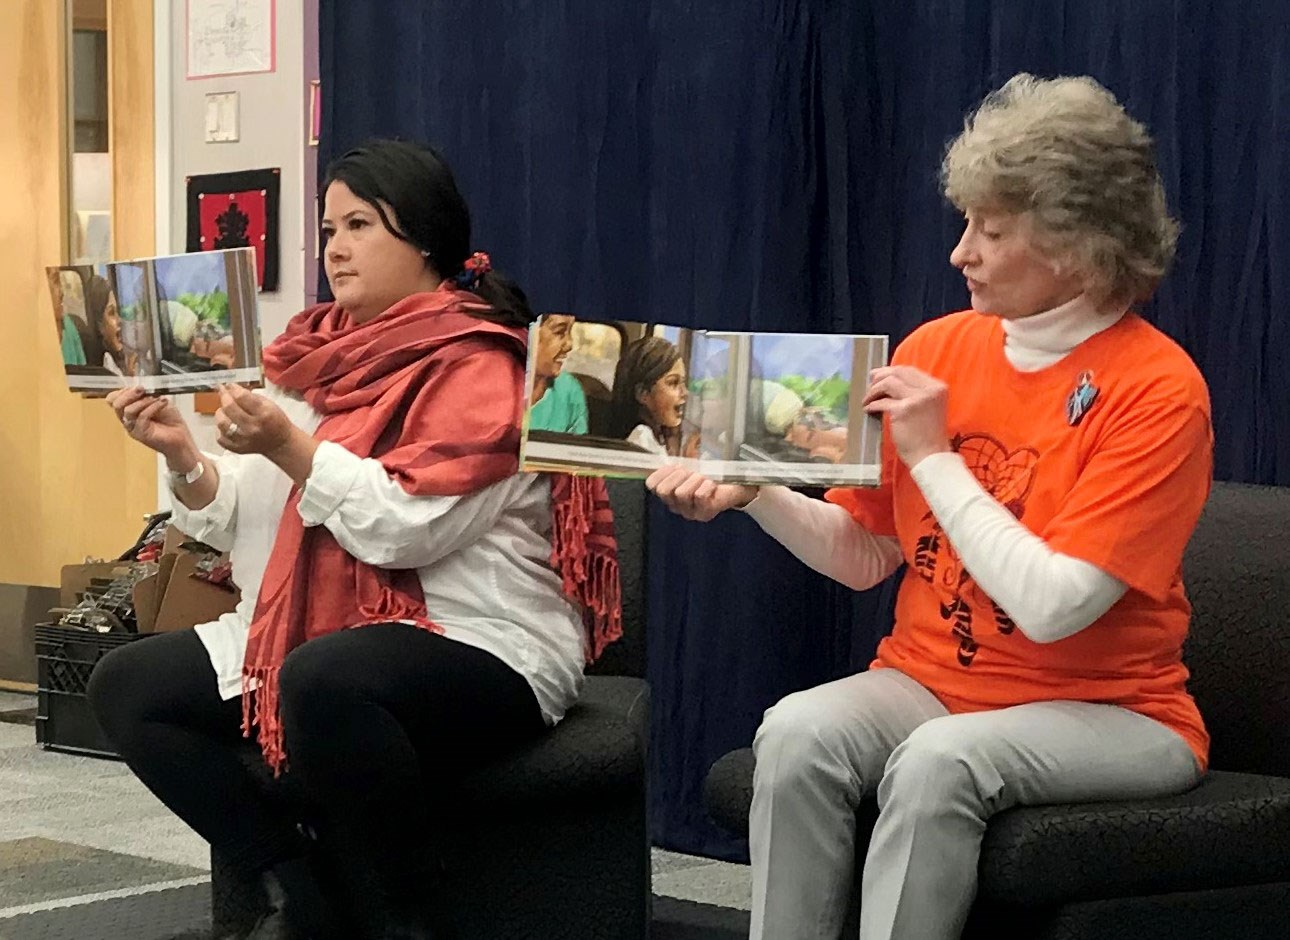 Tuesday, September 28, 2021 – Senator Pat Duncan joins Regional Chief Kluane Adamek, Aagé, Assembly of First Nations, Yukon Region at the Elijah Smith Elementary School in Whitehorse where they read from the book Phyllis’s Orange Shirt, by Phyllis Webstad to students in three different grades to mark Orange Shirt Day.